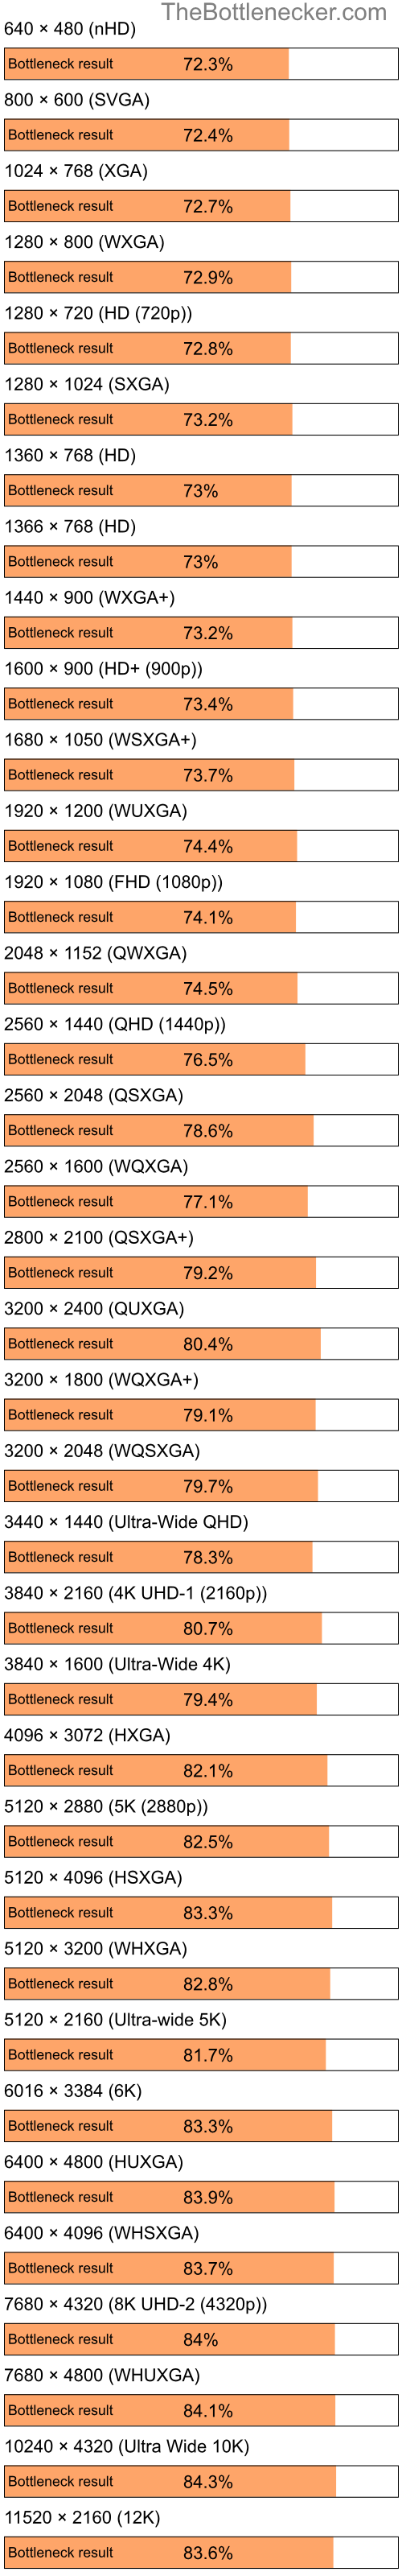 Bottleneck results by resolution for Intel Celeron and NVIDIA Quadro FX 540 in Graphic Card Intense Tasks